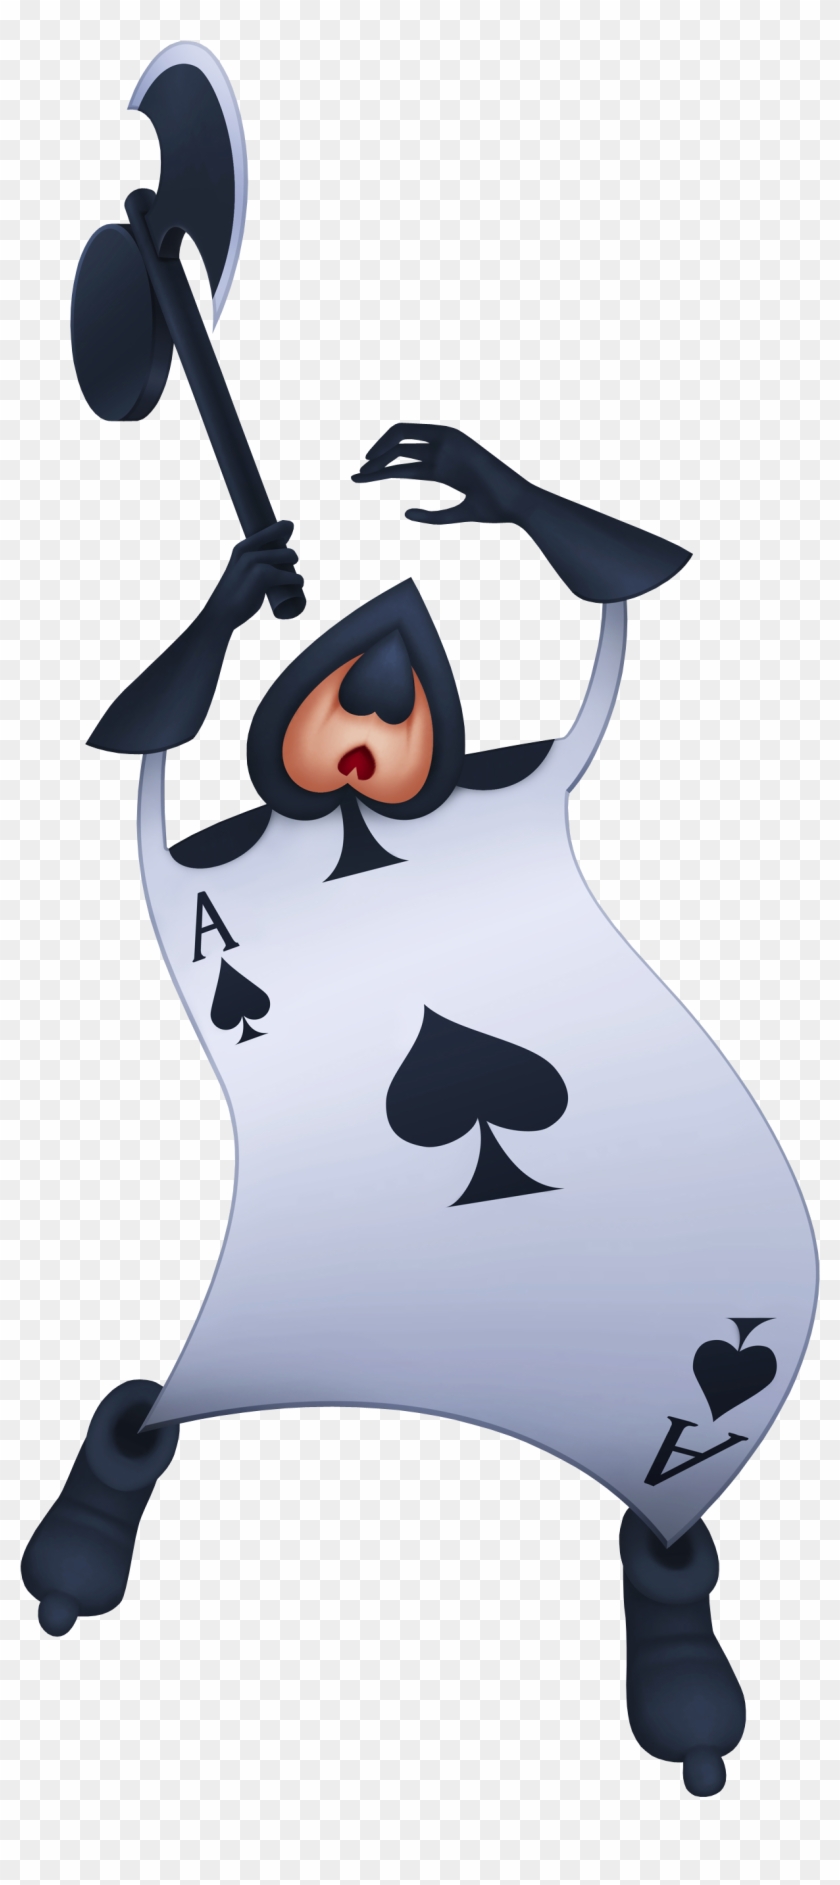 Alice In Wonderland Cartoon Characters All Images Are - Spades Alice In  Wonderland - Free Transparent PNG Clipart Images Download